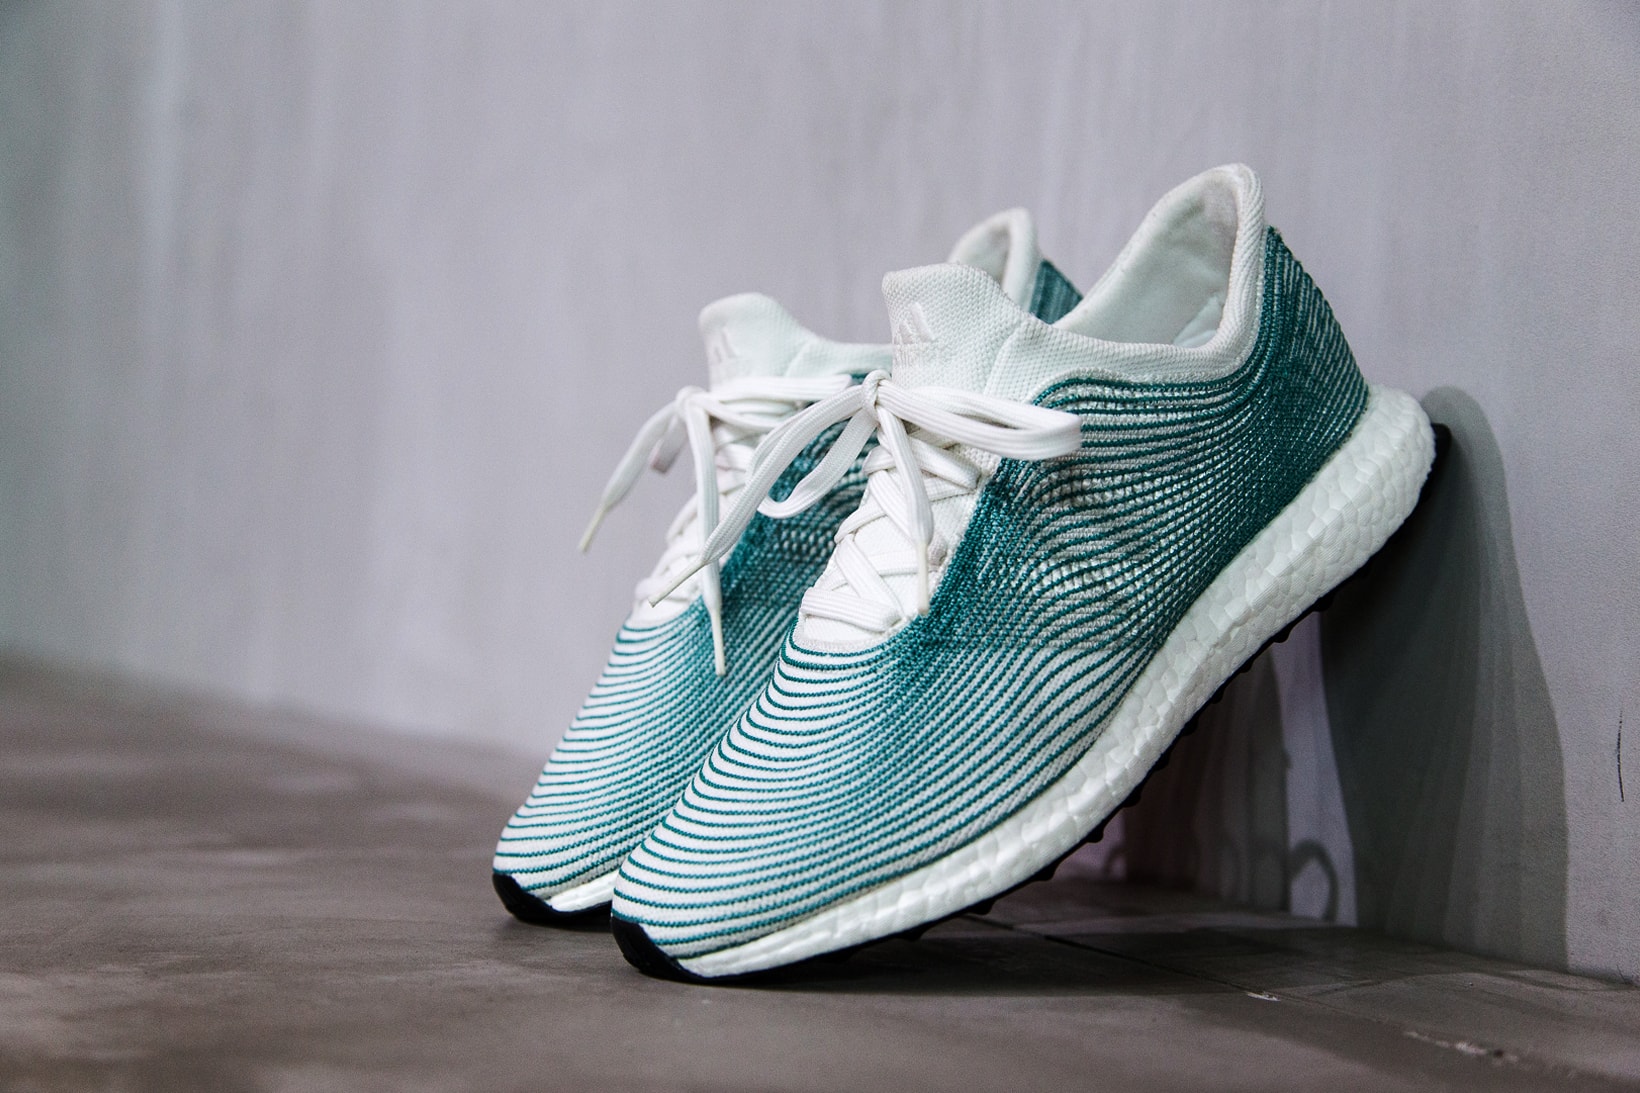 Closer Look at adidas Parley Sustainable Shoe